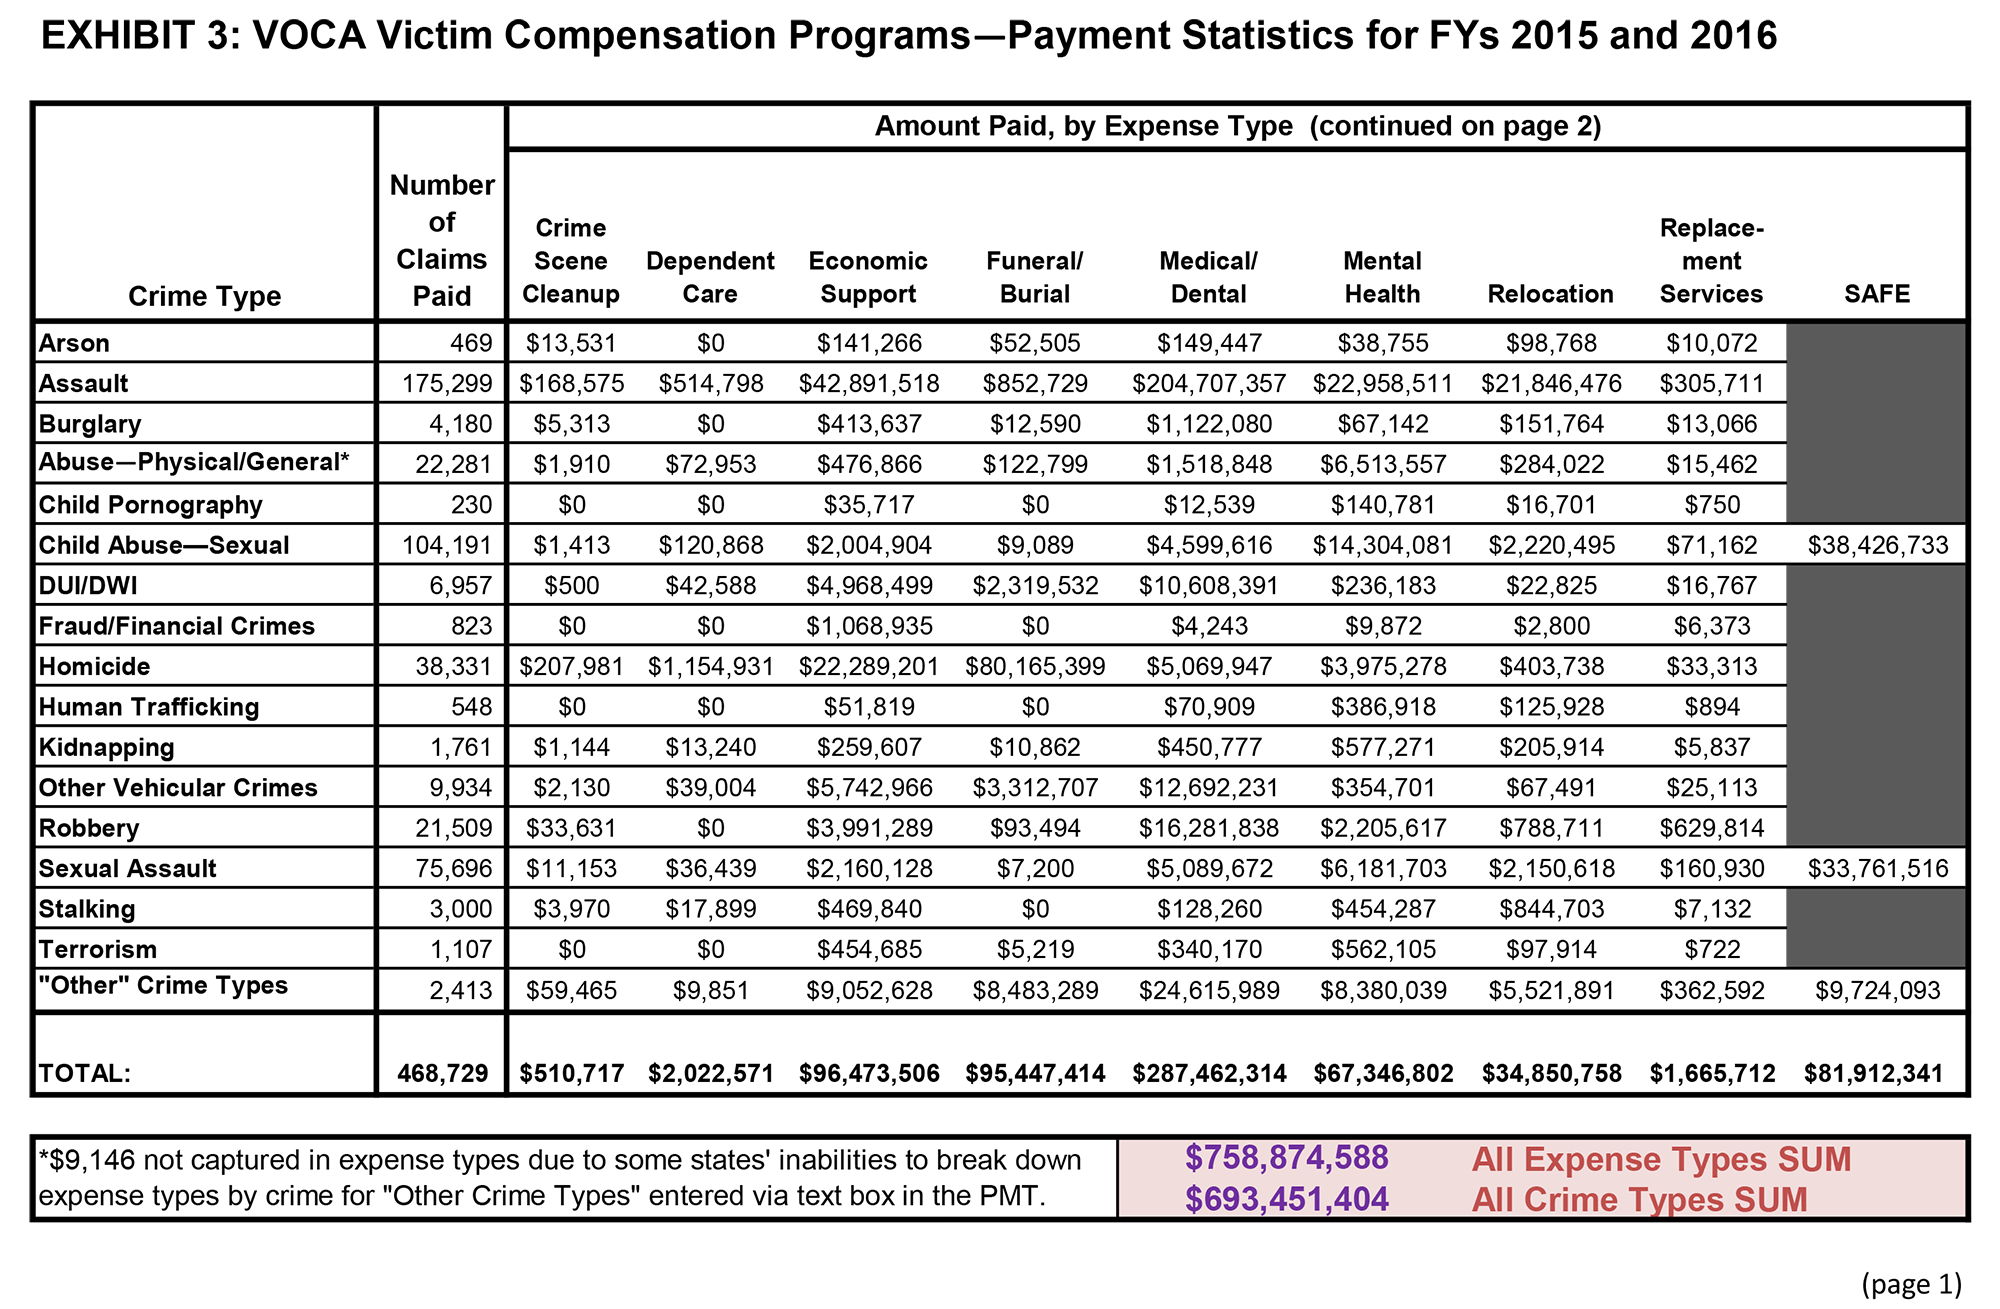 image of Exhibit 3. VOCA Victim Compensation Programs: Payments Statistics For FYs 2015 and 2016